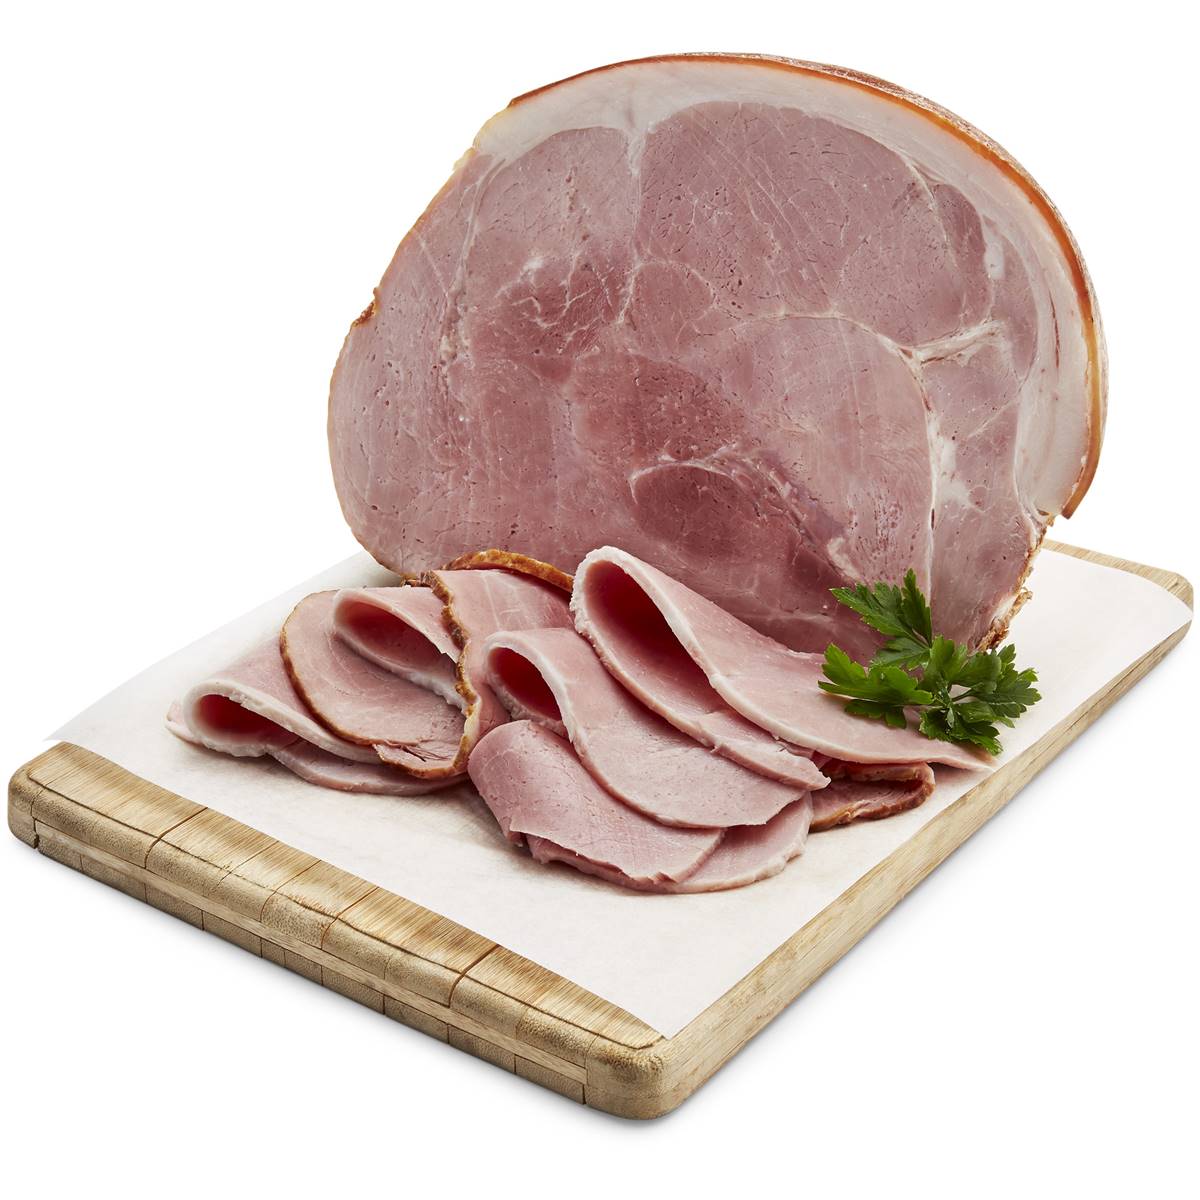 Calories in Pastoral Free Range Ham Off The Bone Freshly Sliced From The Deli